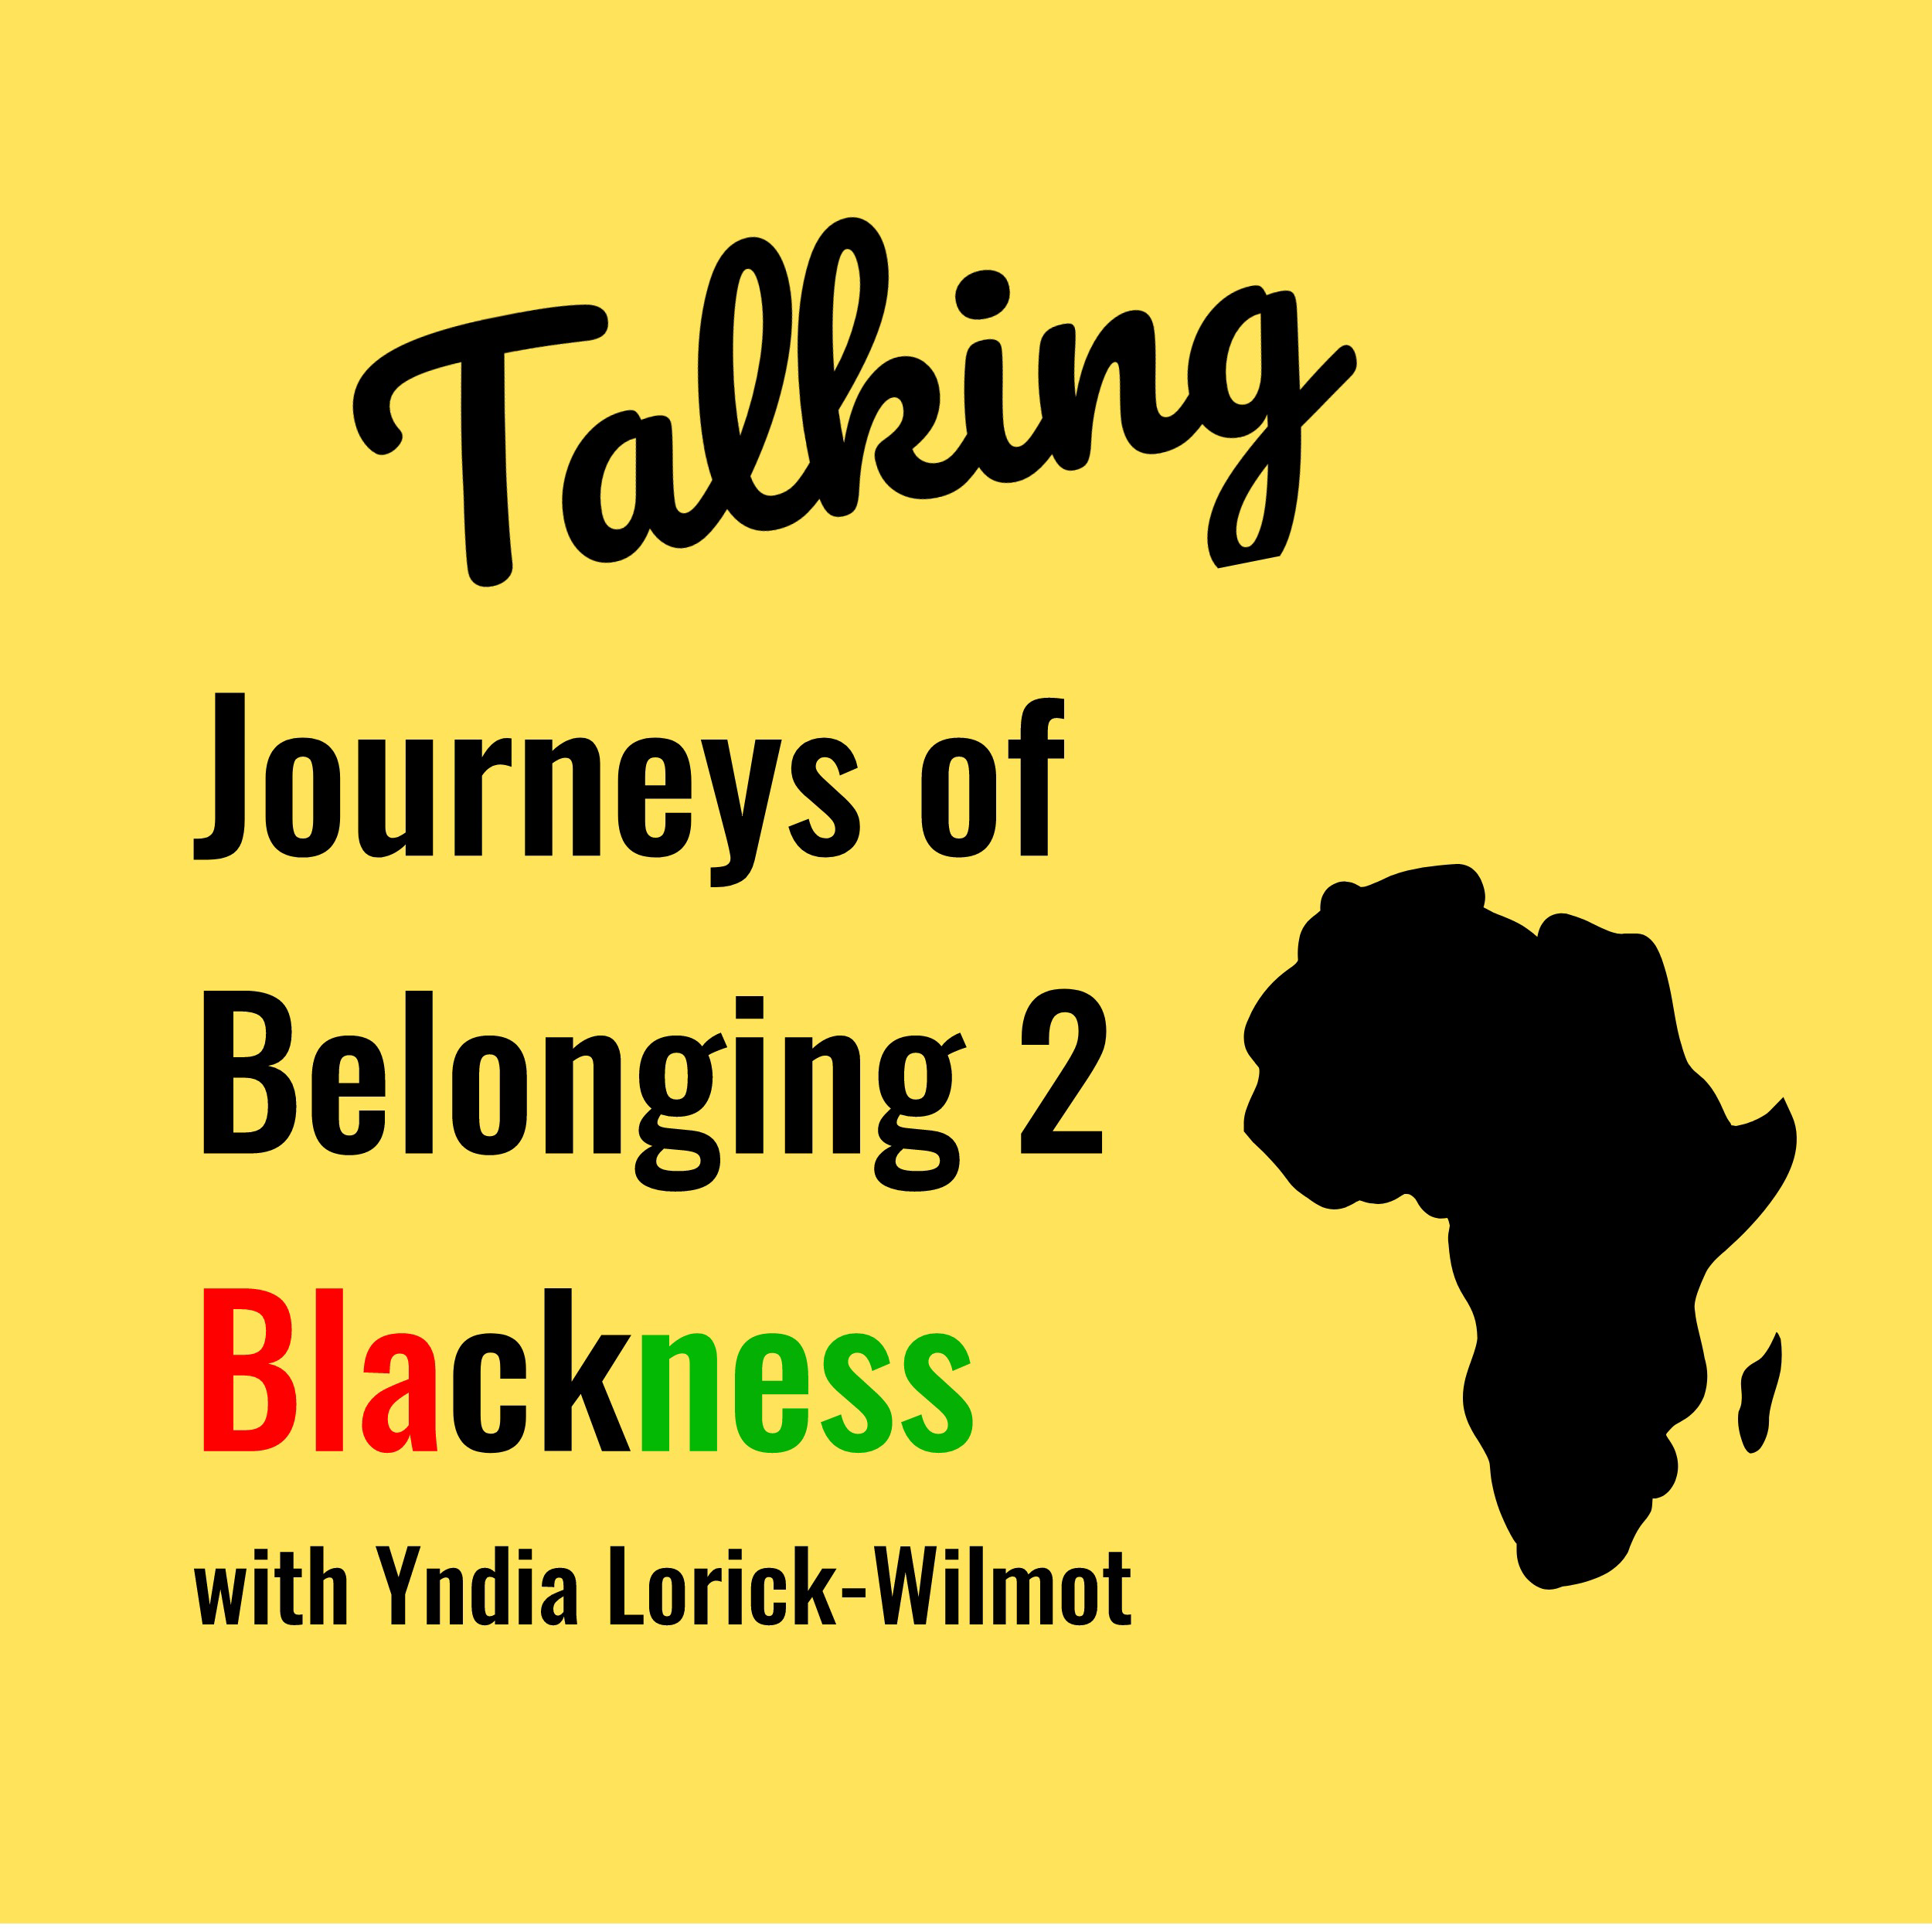 A highlight from Talking Journeys of Belonging 2 Blackness- Podcast Episode 020: Janell Hobson Podcast Episode 020, Janell Hobson